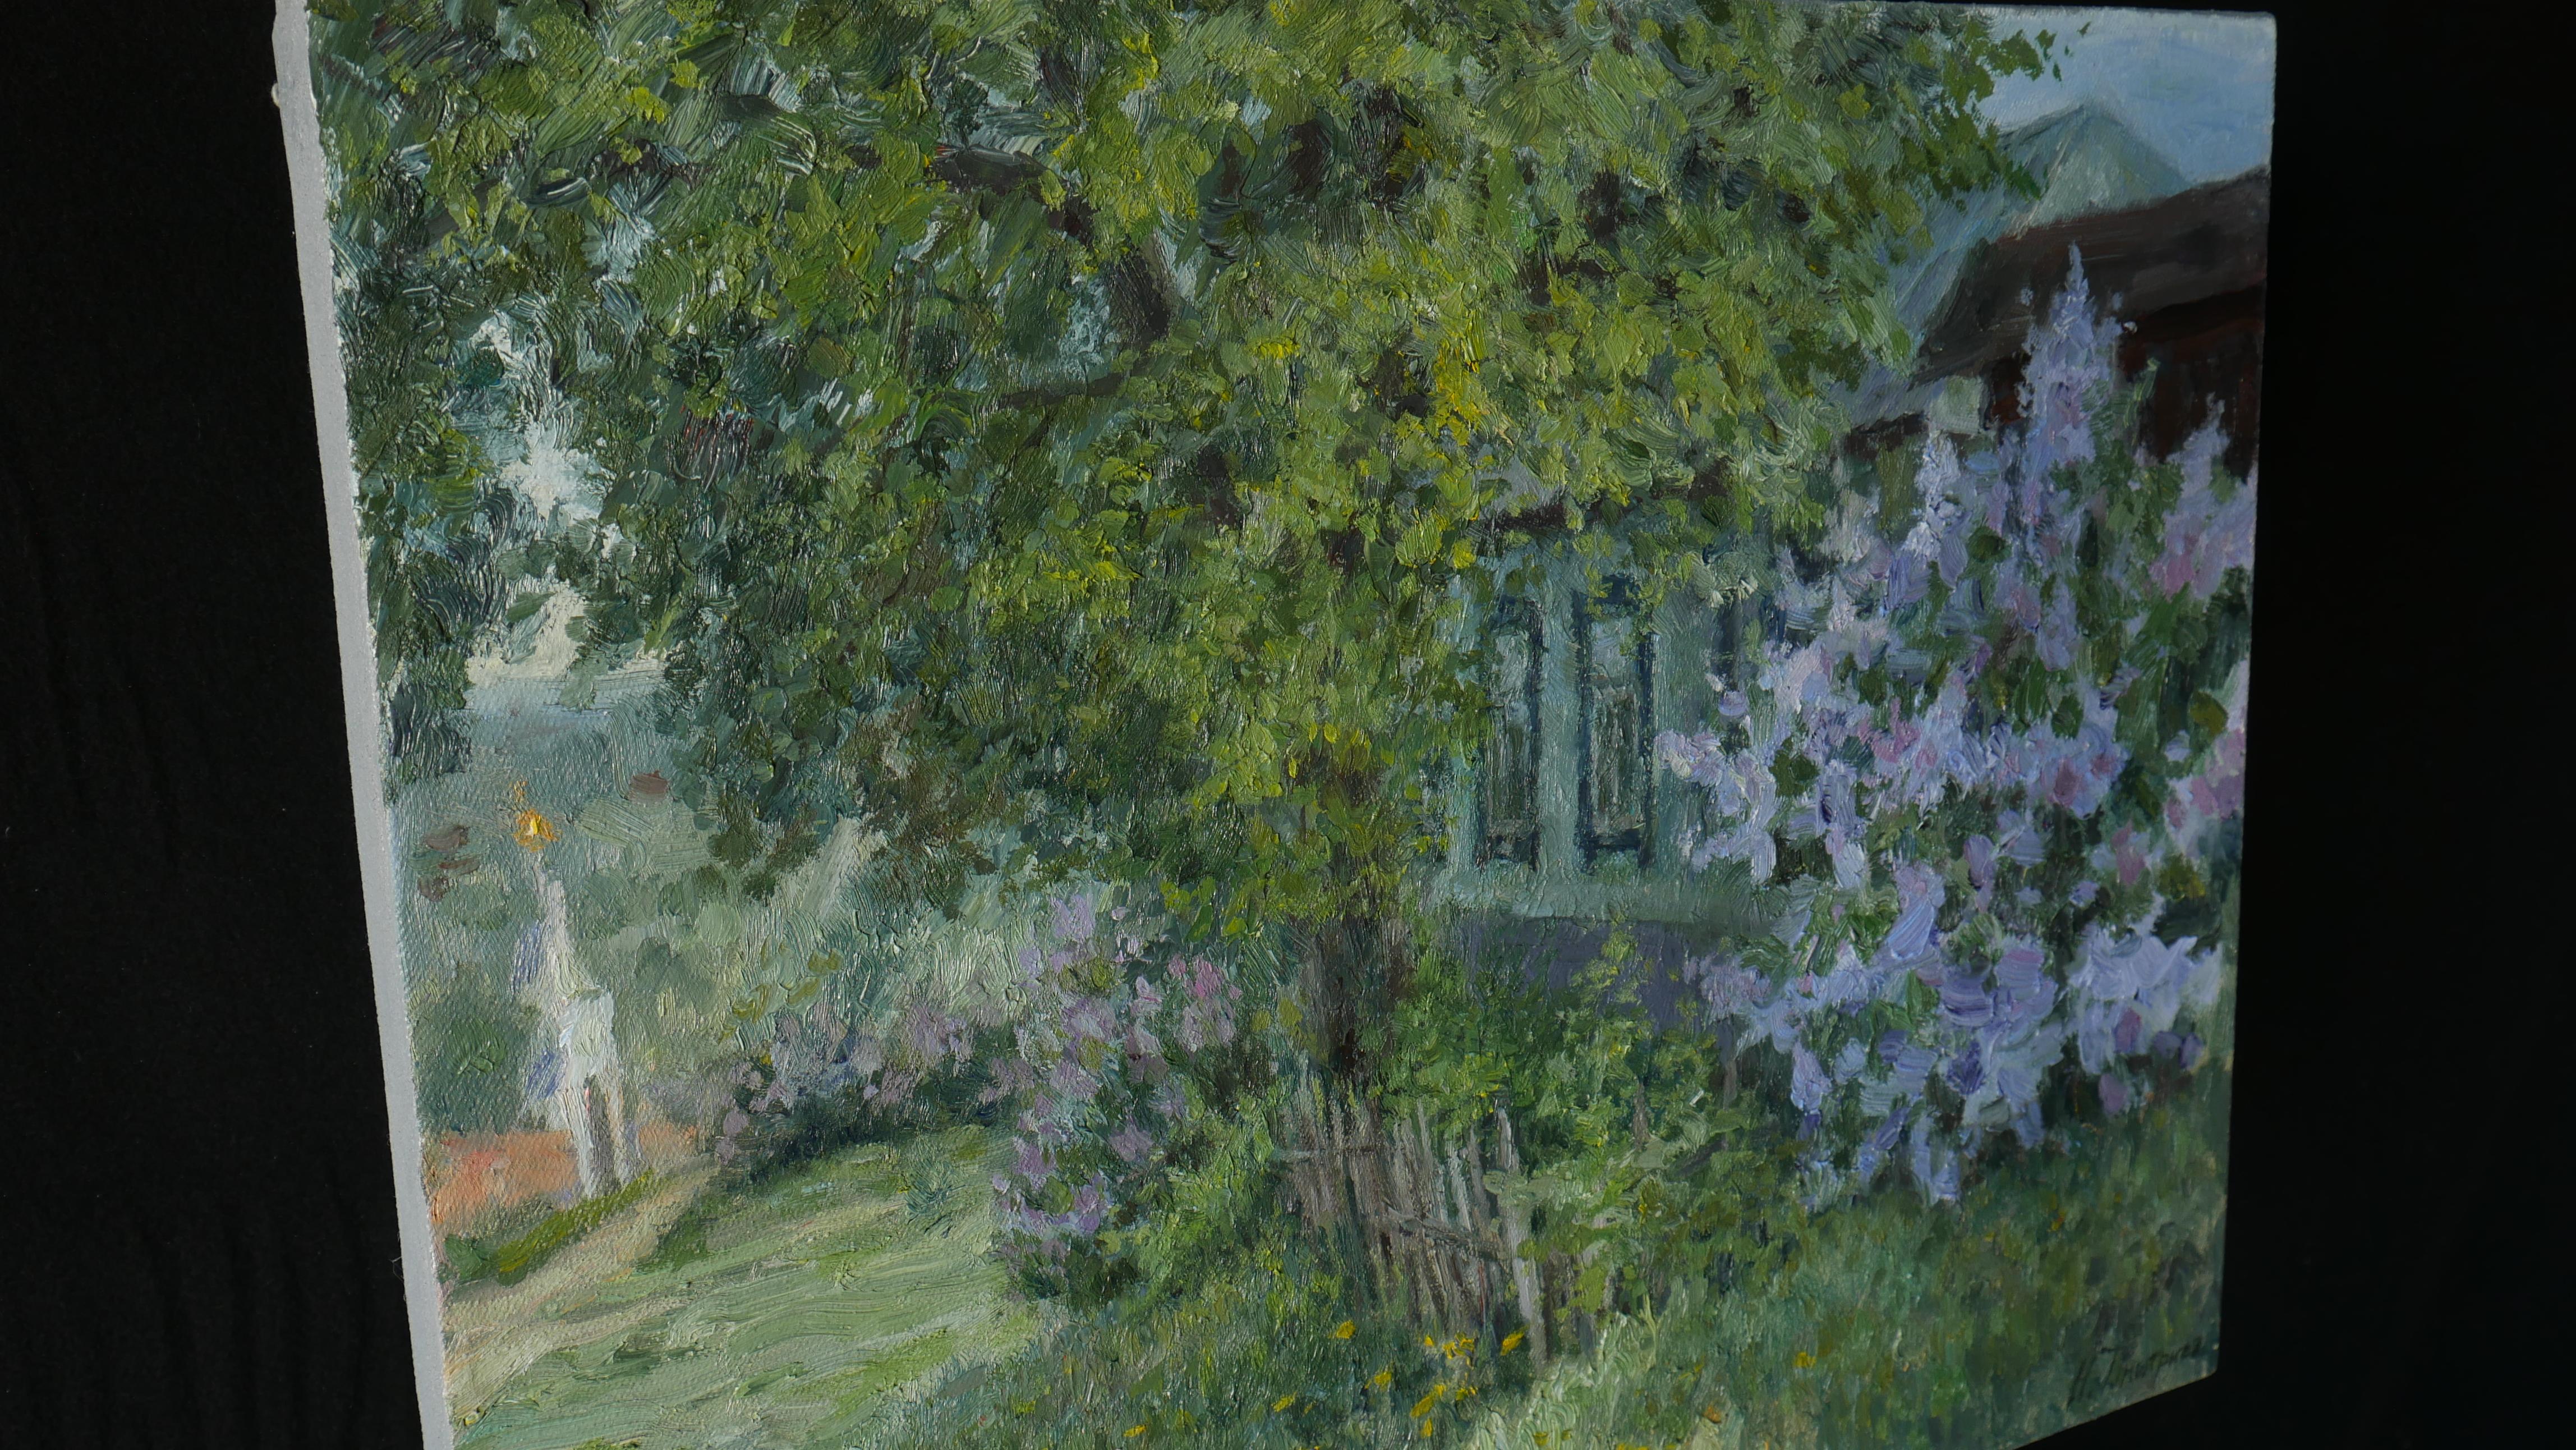 Blooming Lilacs - lilacs painting - Impressionist Painting by Nikolay Dmitriev